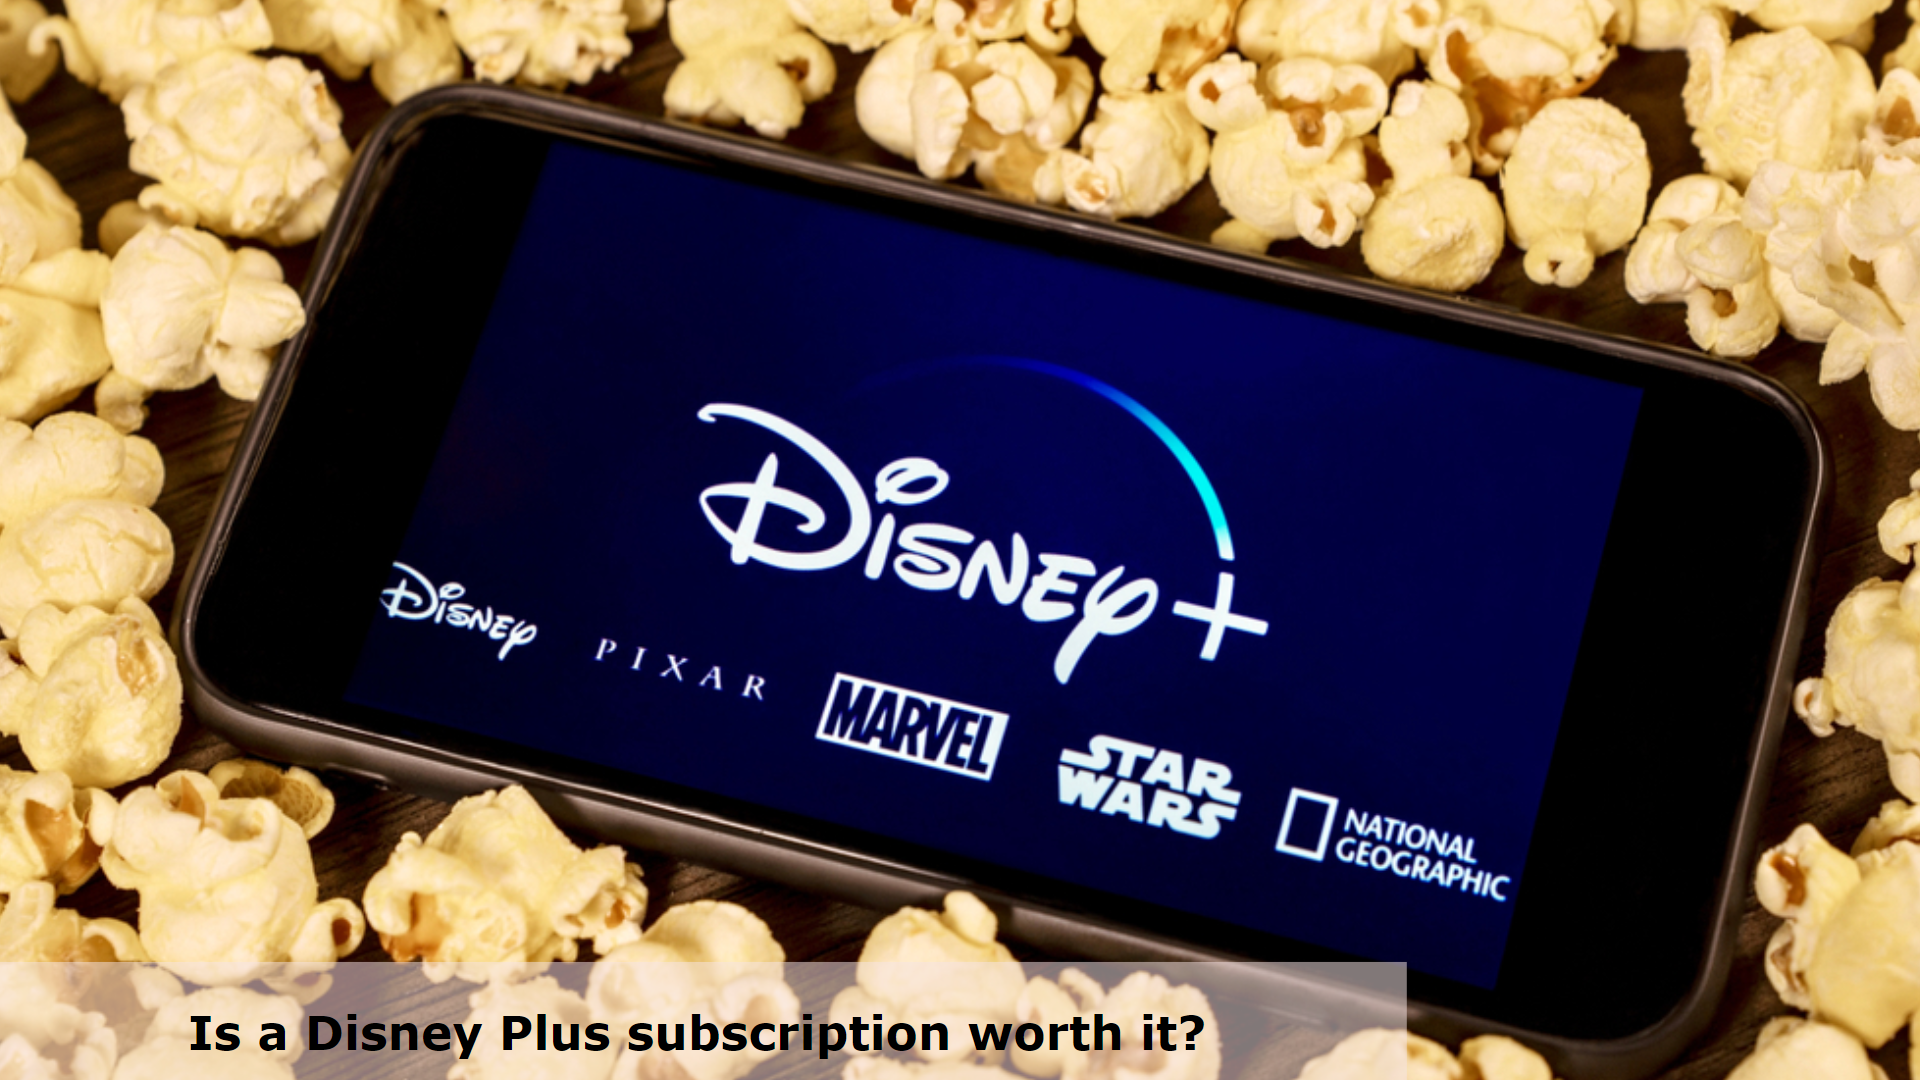 Is Disney Plus Singapore worth it?, how much disney plus singapore, Is Disney Plus available in Singapore?, How Much Is Disney Plus Singapore Singtel?, How do I get free Disney Plus Singapore?, How Much Is Disney Plus only?, disney plus singapore price family plan, disney plus singapore family plan, disney plus singapore free trial, disney plus singapore promotion, disney plus singapore how many devices, 
disney singapore, disney plus shows, disney plus singapore singtel, Guide To Disney+ Subscription In Singapore, how to subscribe to disney plus singapore, How do I subscribe to Disney Plus Singapore?, Can you watch Disney Plus in Singapore?, What is the best way to subscribe to Disney Plus?, How do I subscribe to Disney Plus again?, 